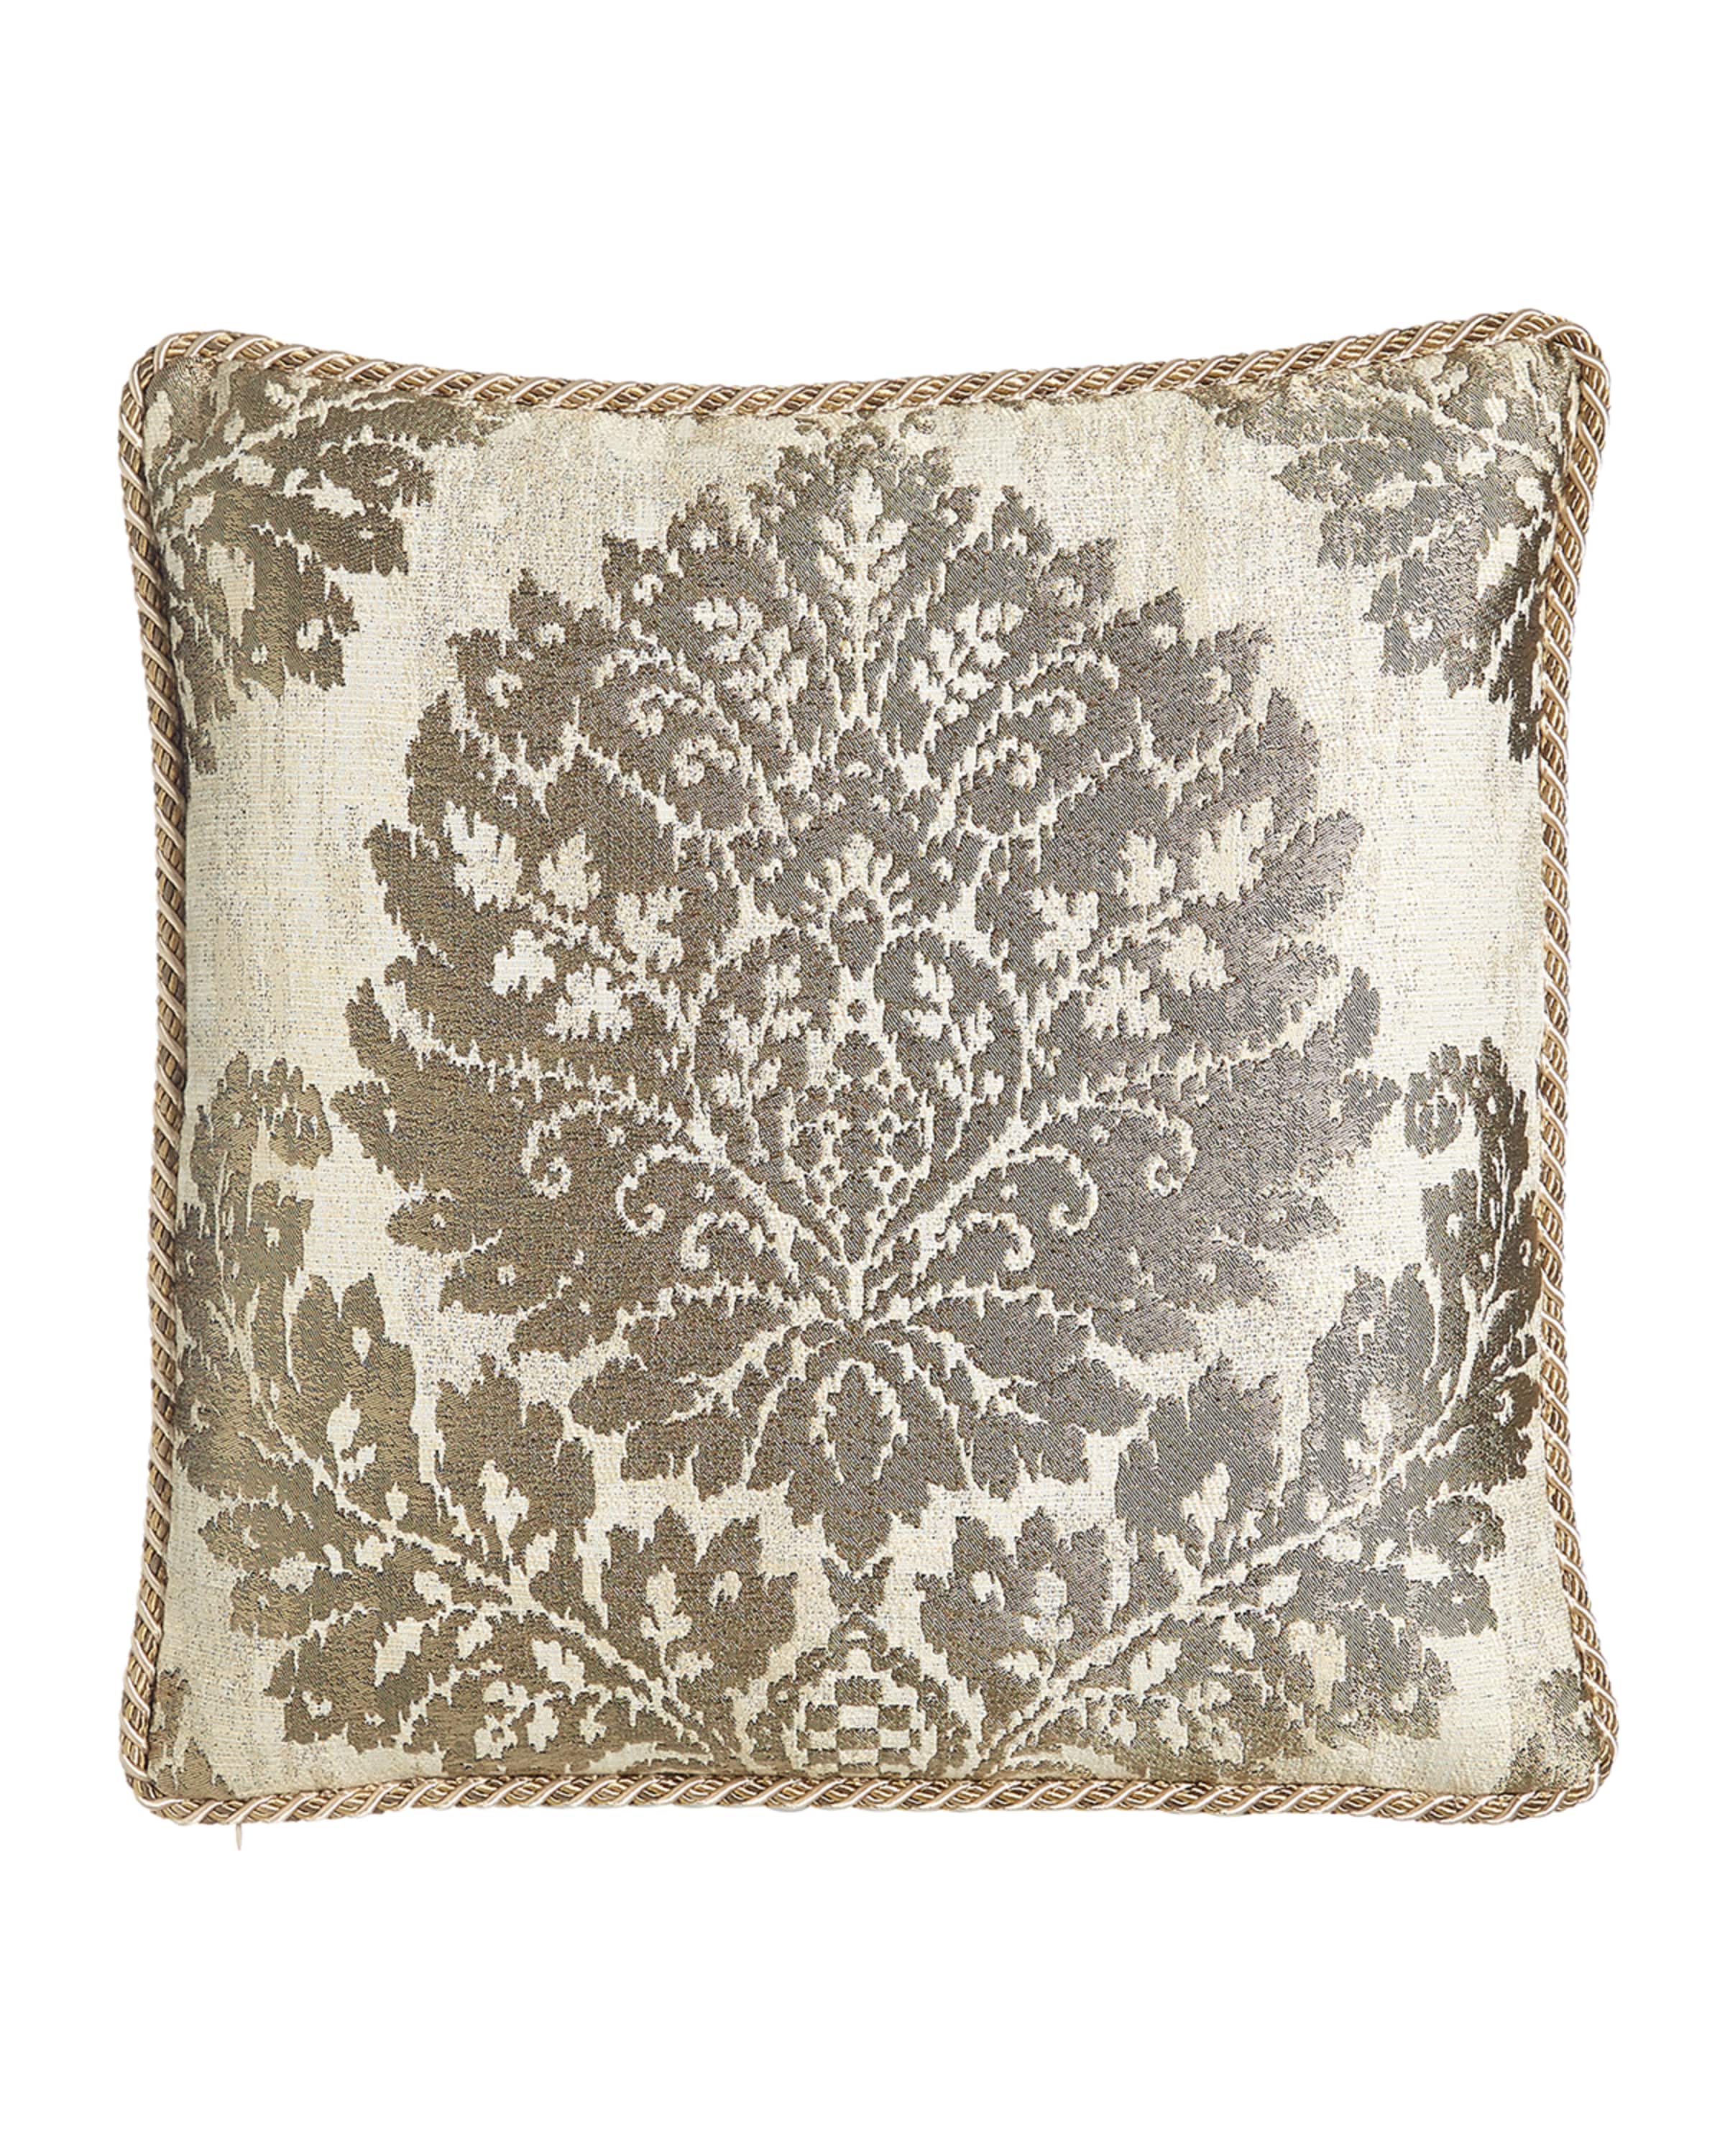 Austin Horn Collection Vienna Reversible Pillow, 20"Sq.